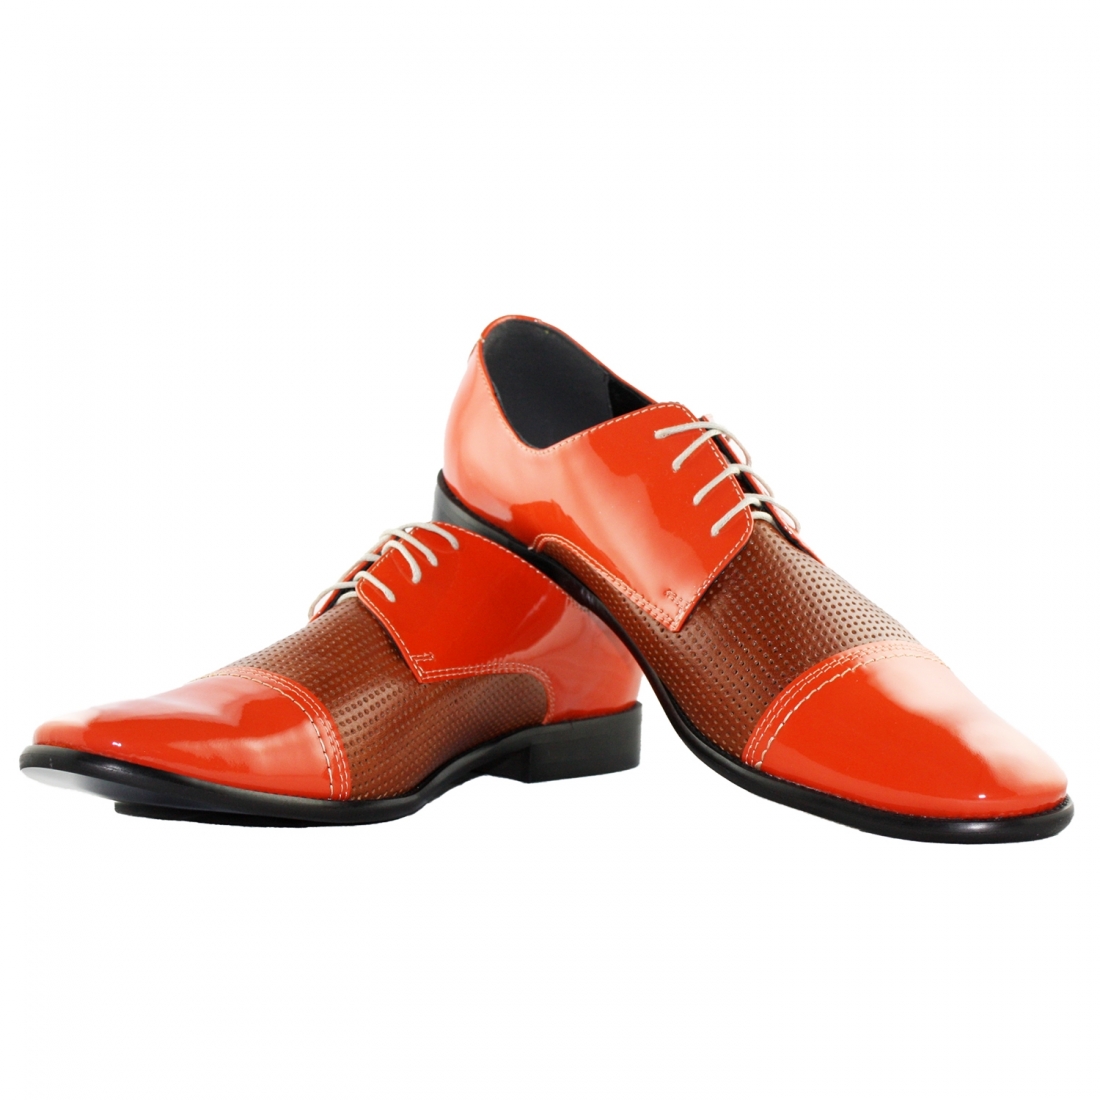 Modello Soterone - Chaussure Classique - Handmade Colorful Italian Leather Shoes